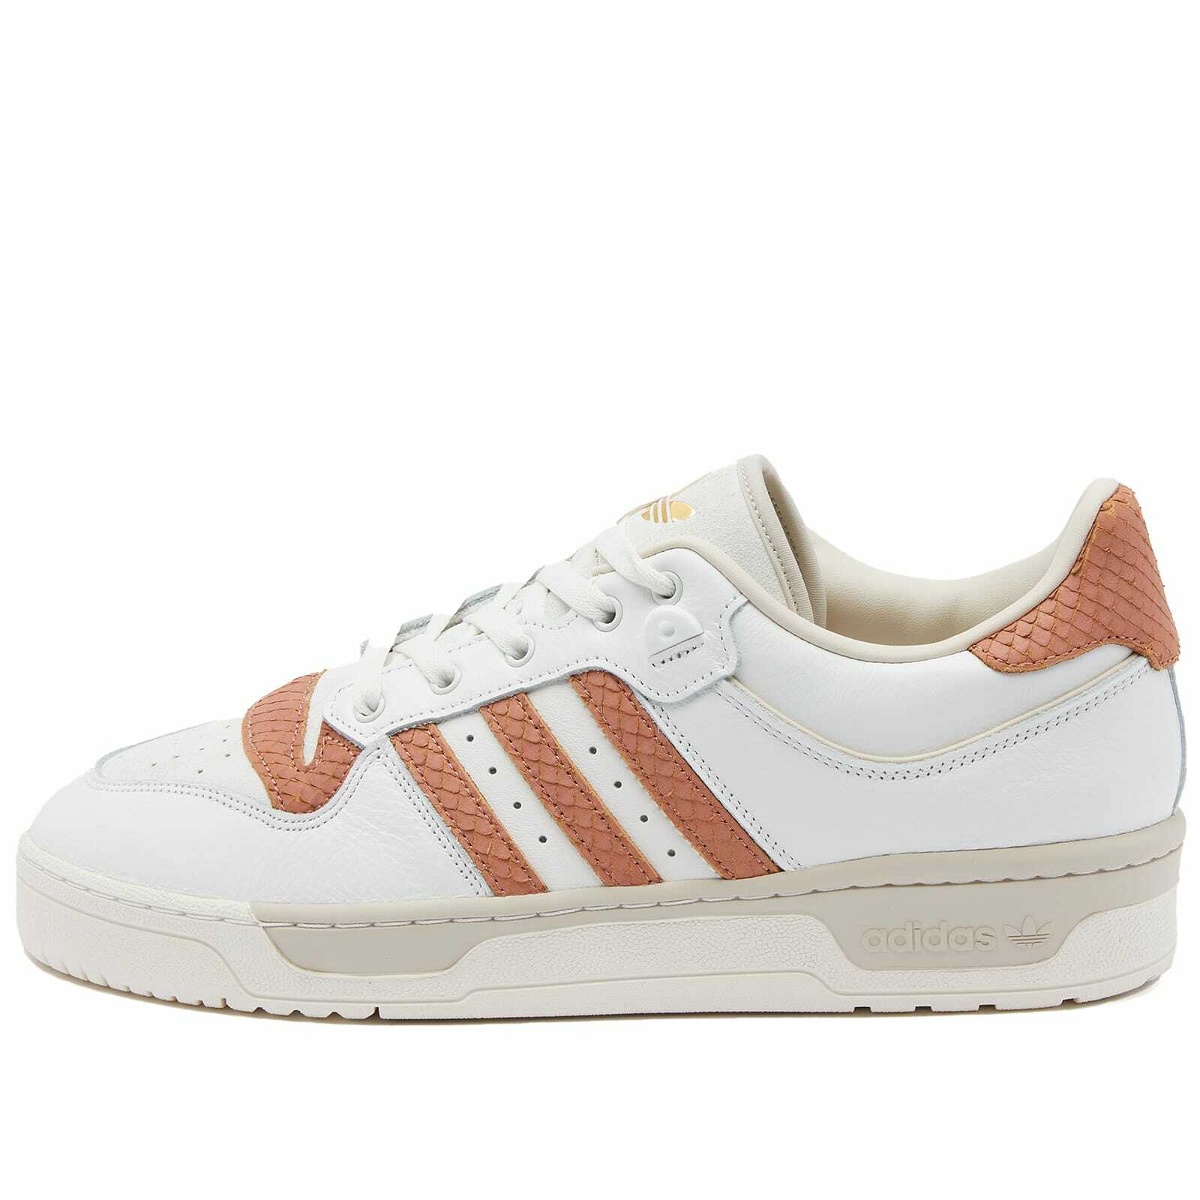 86 Rivalry Core Sneakers White/Clay adidas Low Strata in Adidas